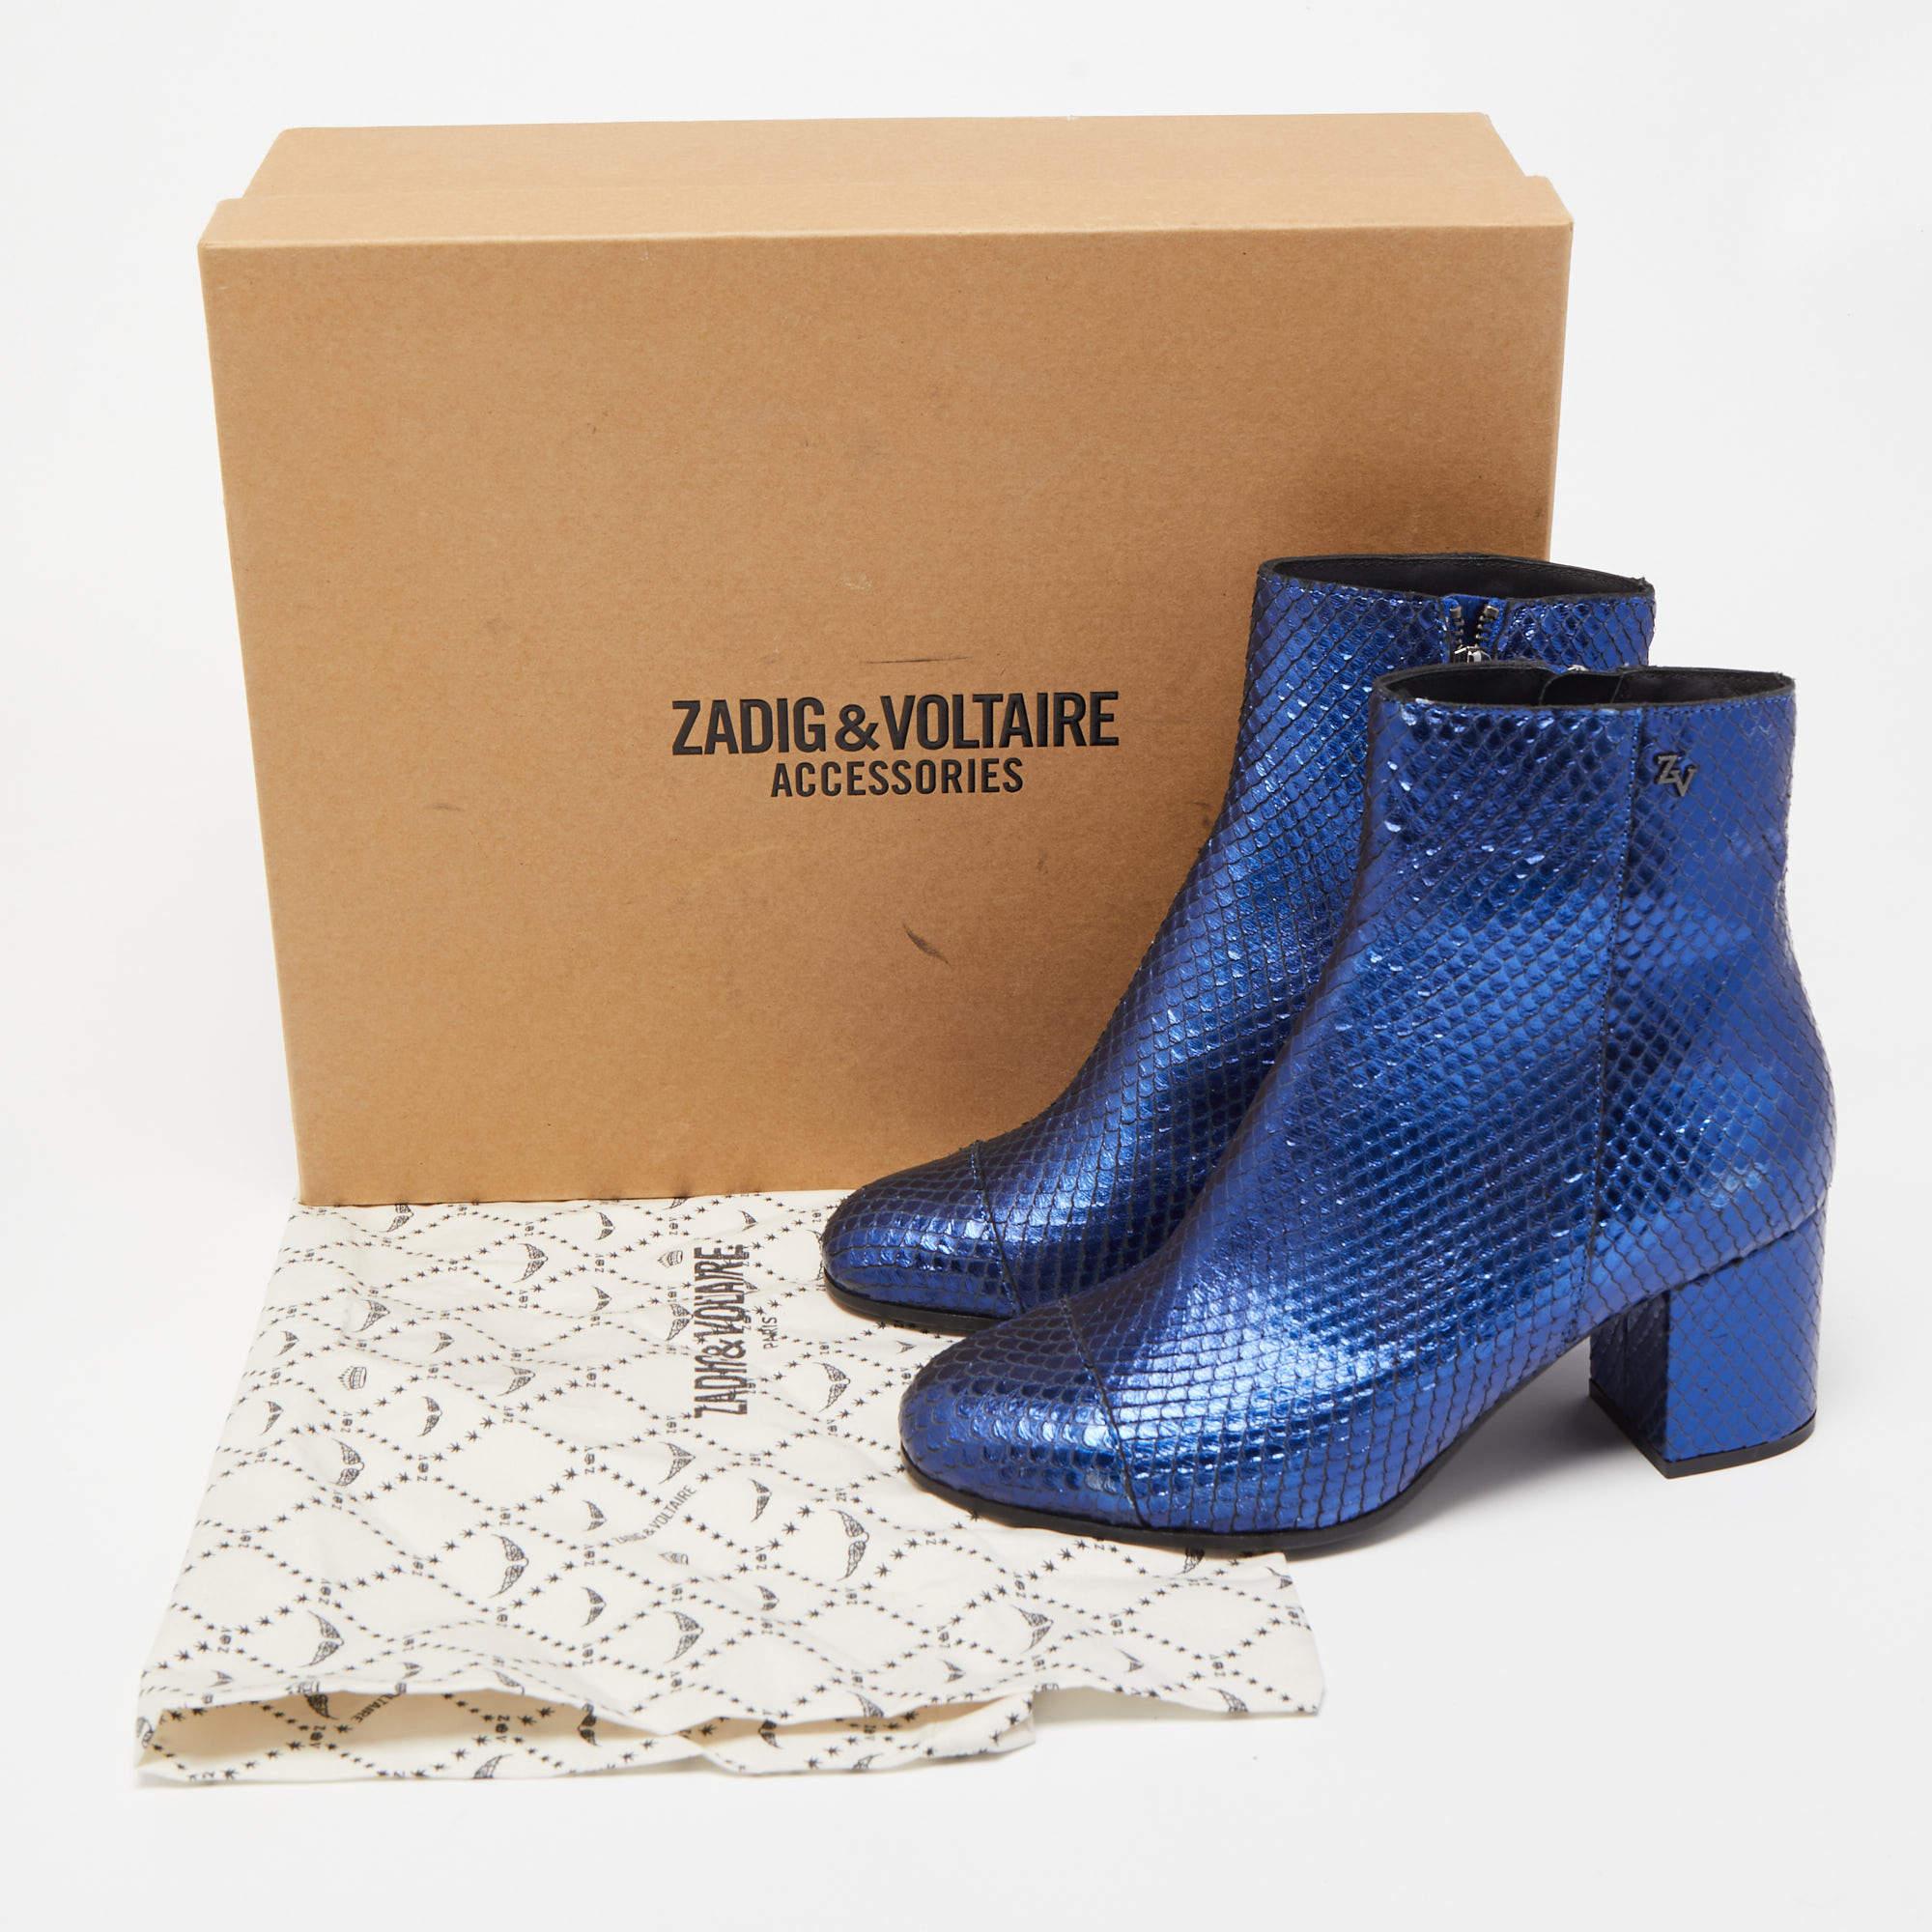 Zadig & Voltaire Blue Python Embossed Leather Block Heel Ankle Booties Size 36 For Sale 2